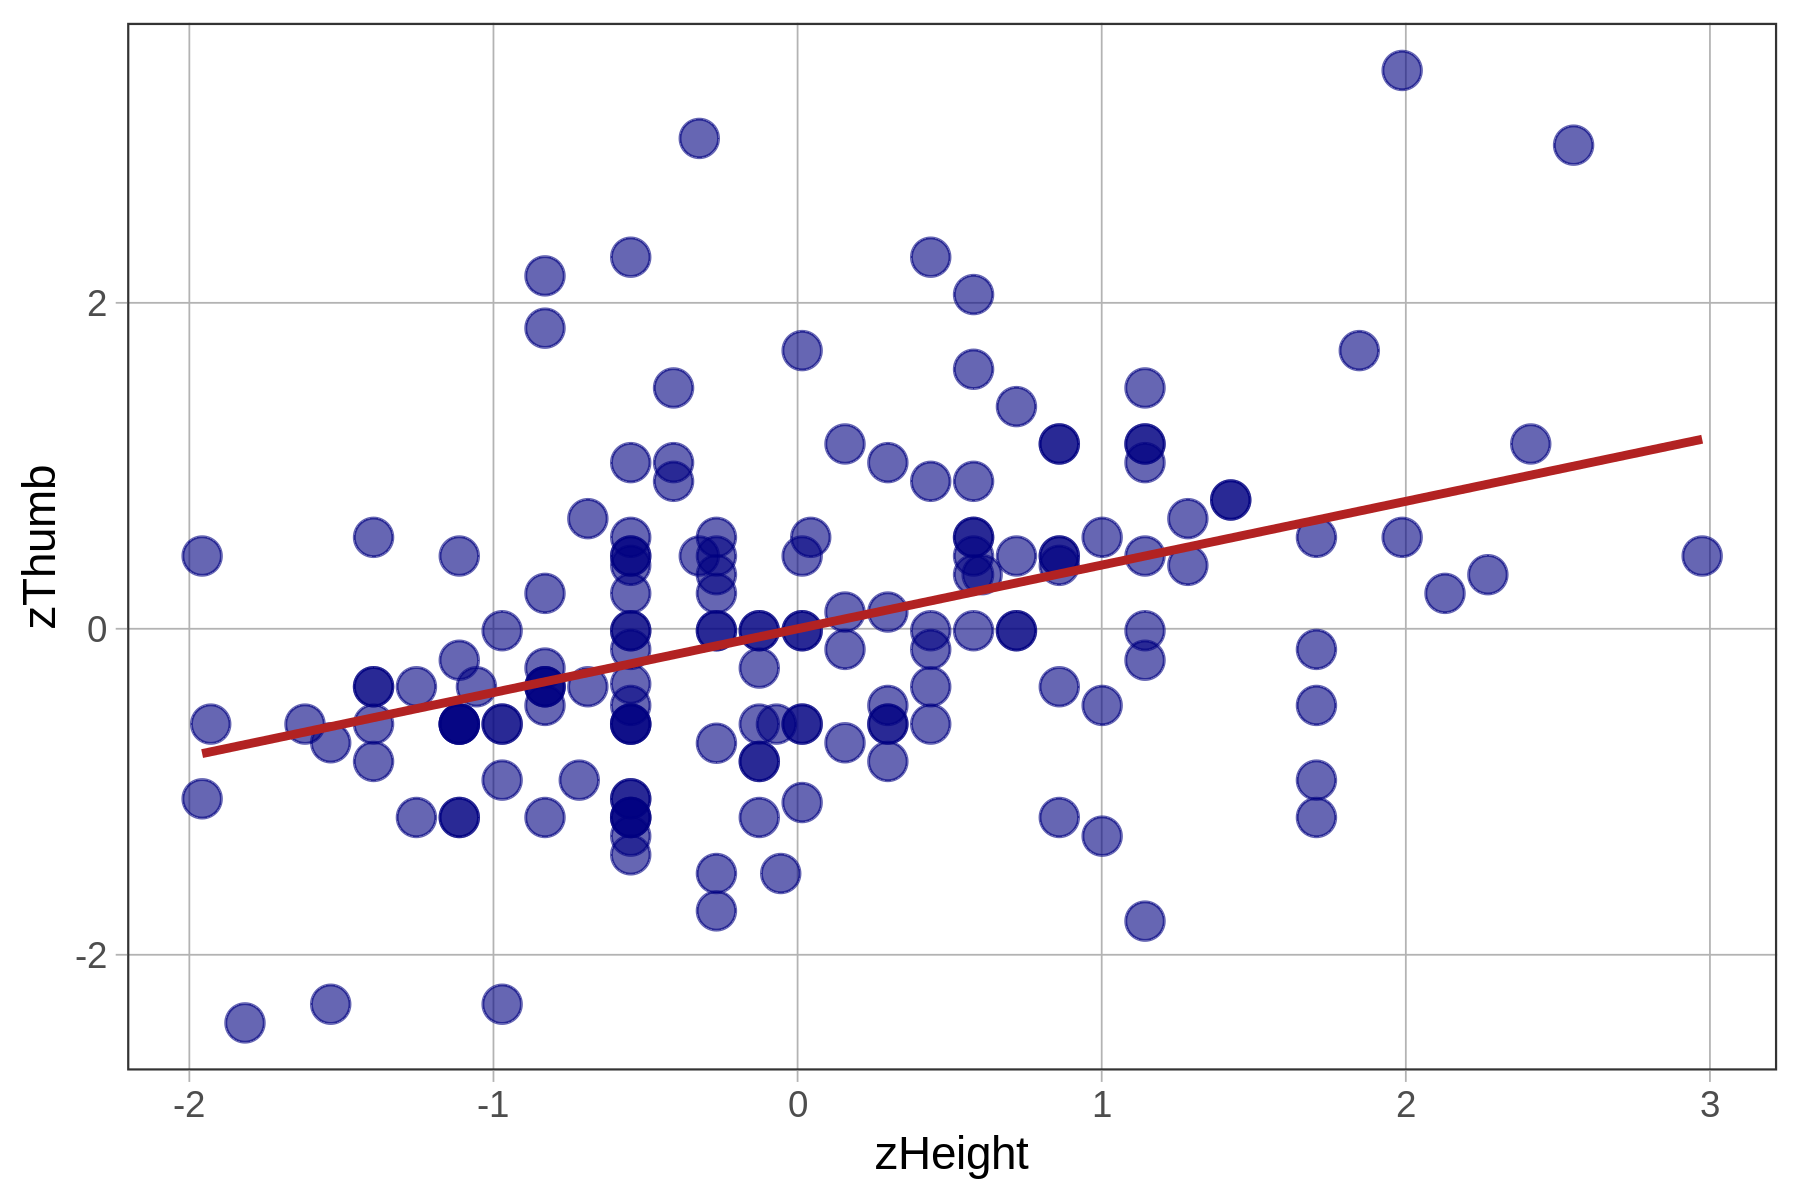 A scatterplot of the distribution of zThumb by zHeight. The two distributions look the same except the scale of the axes.